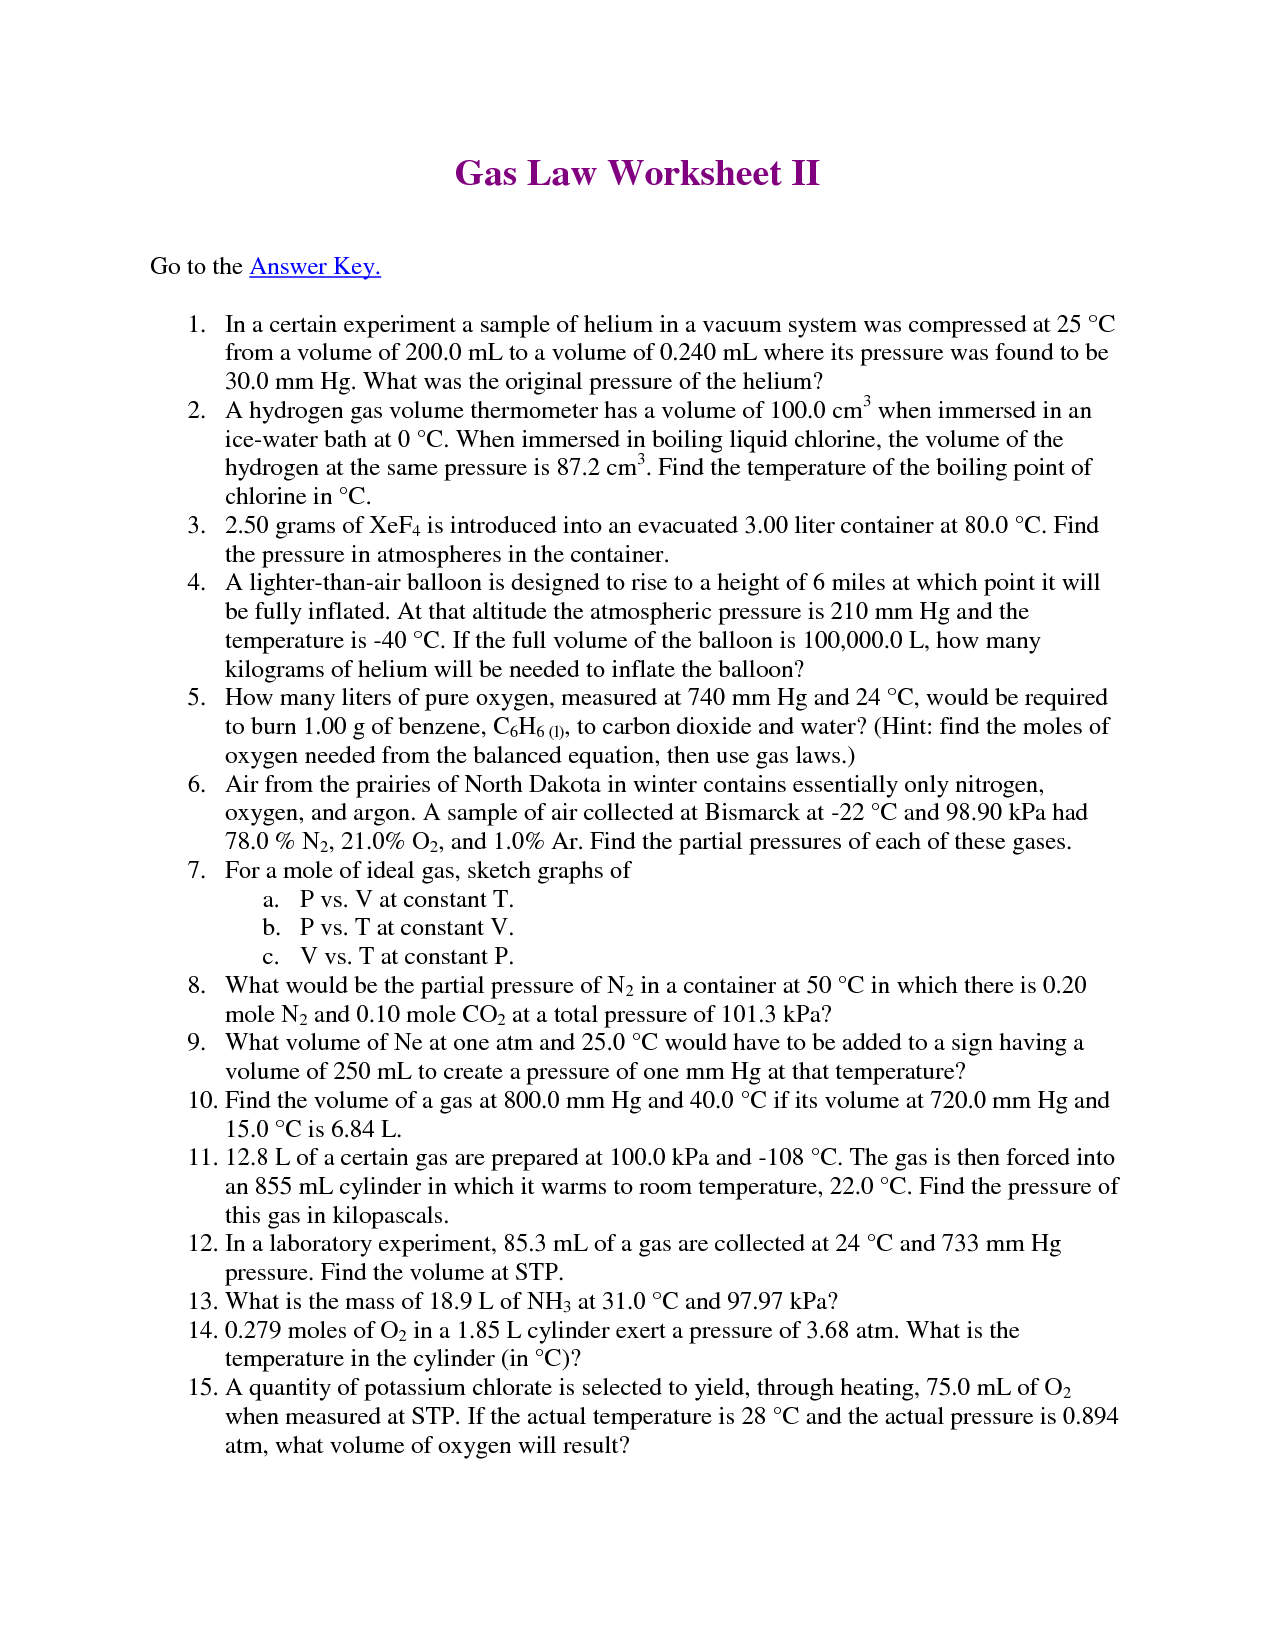 Gas Laws Worksheet with Answers Image